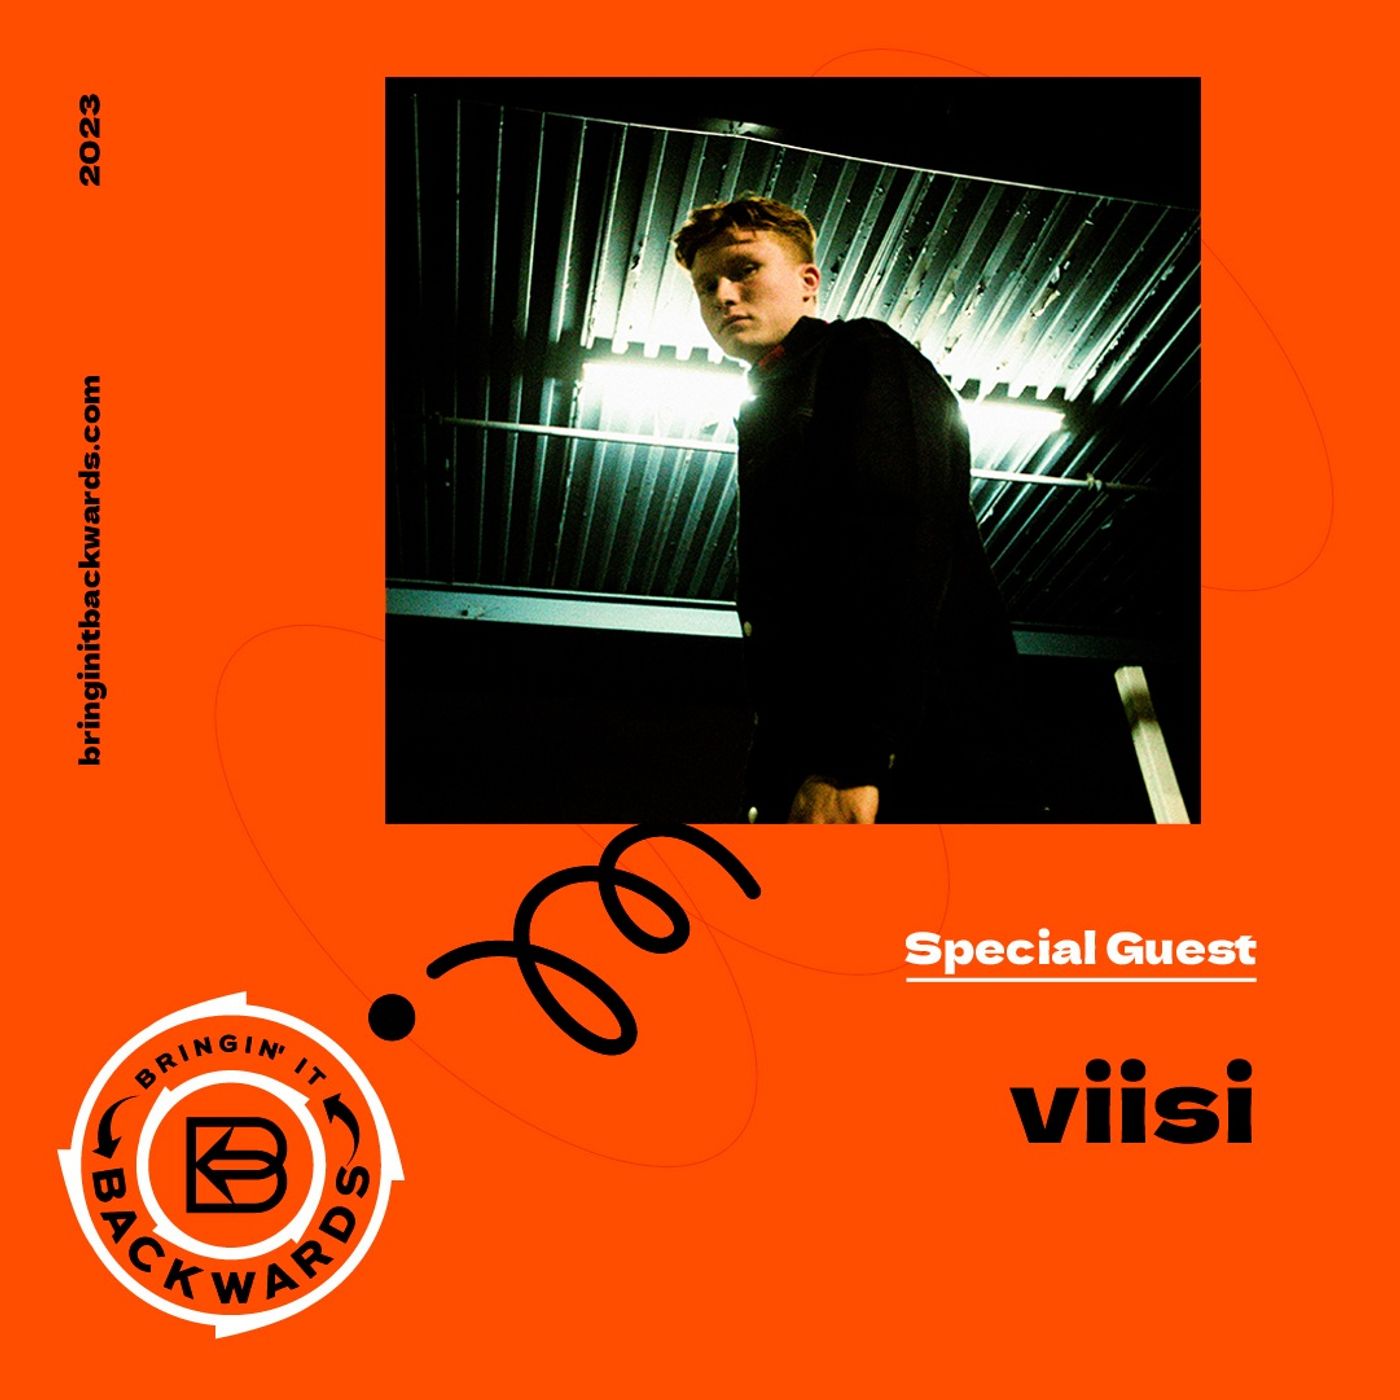 Interview with Viisi